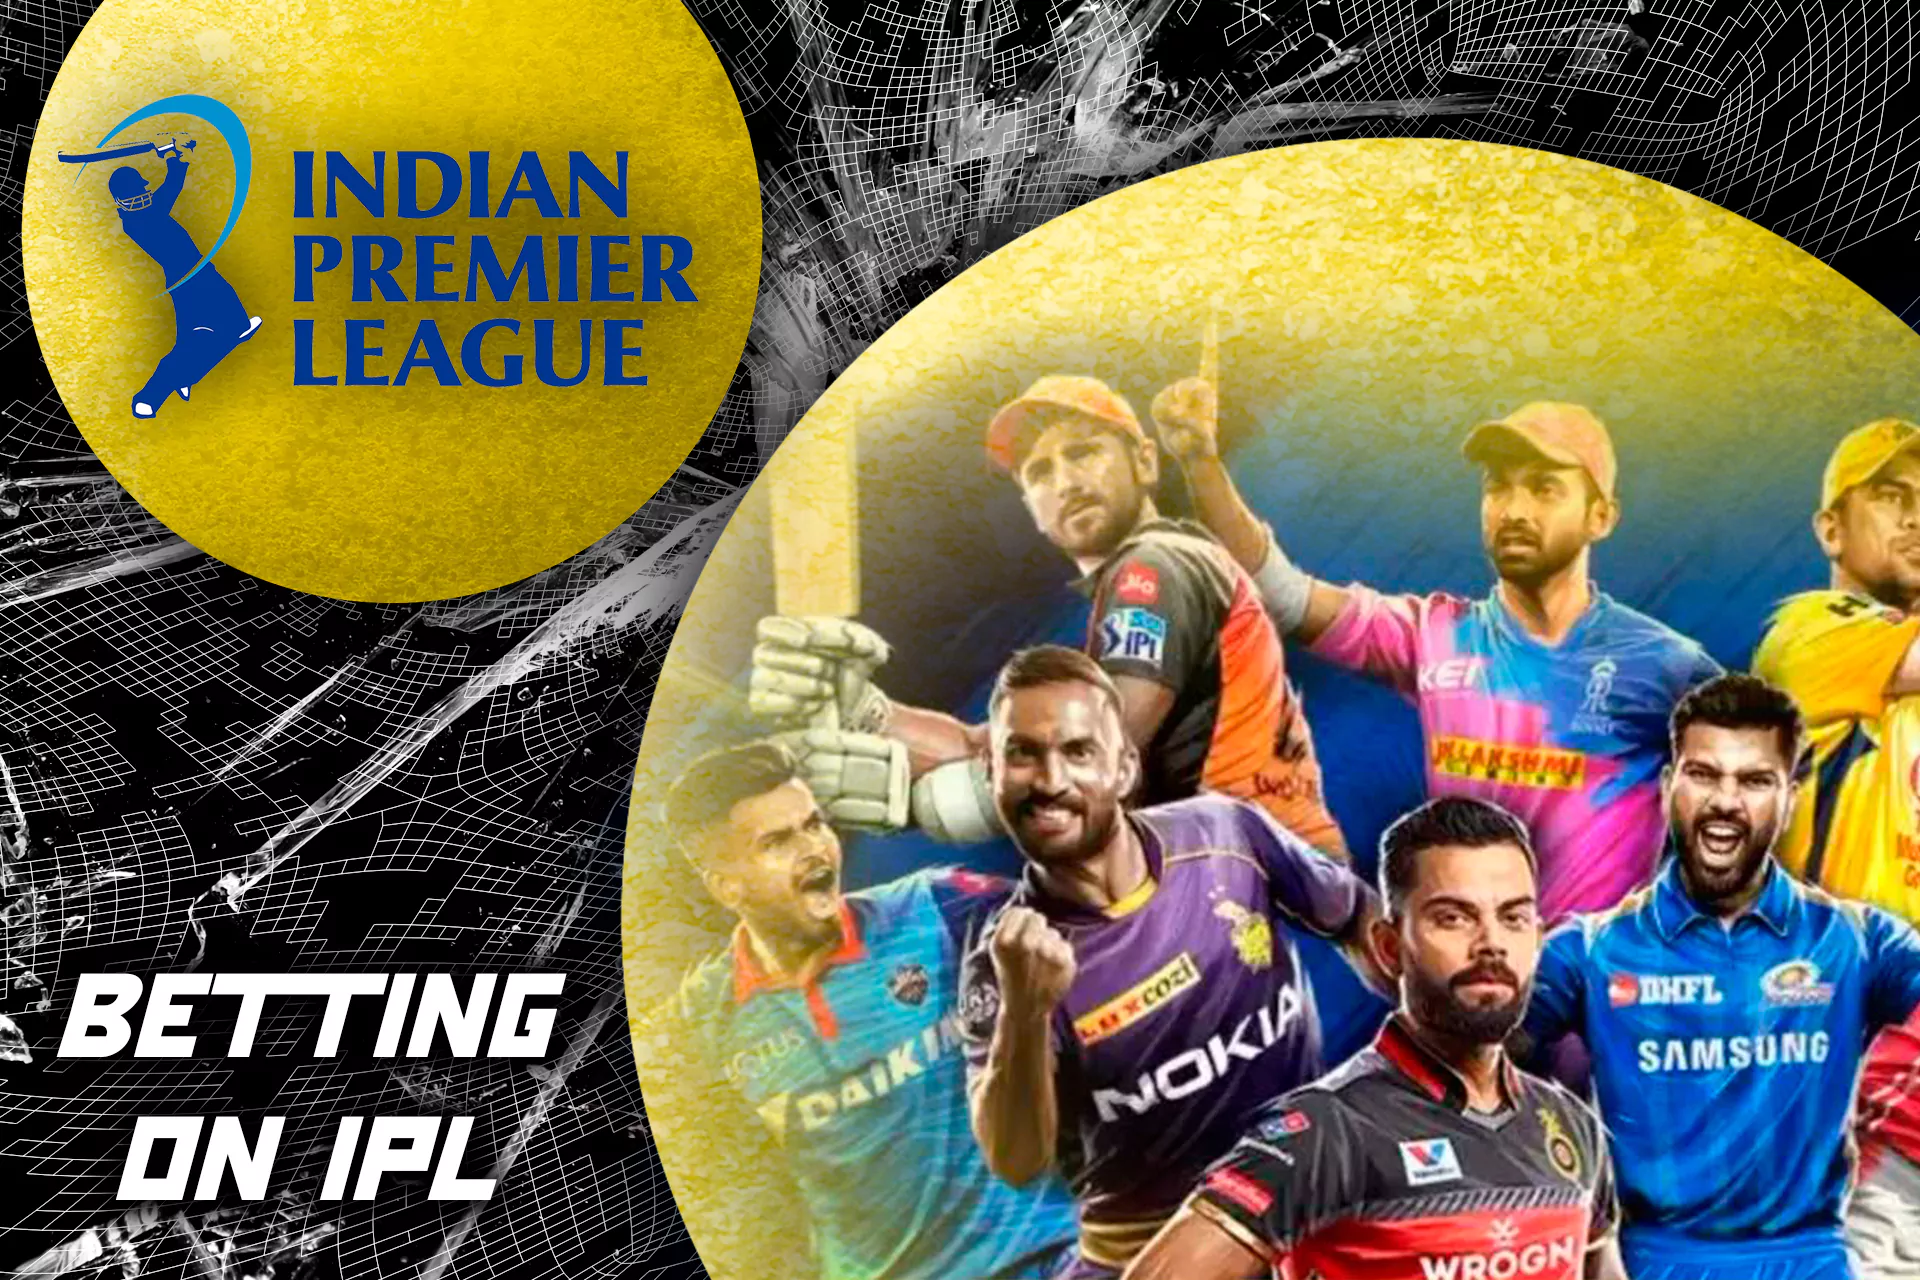 Among cricket betting, some of the most popular bets are bets on the IPL Championship.